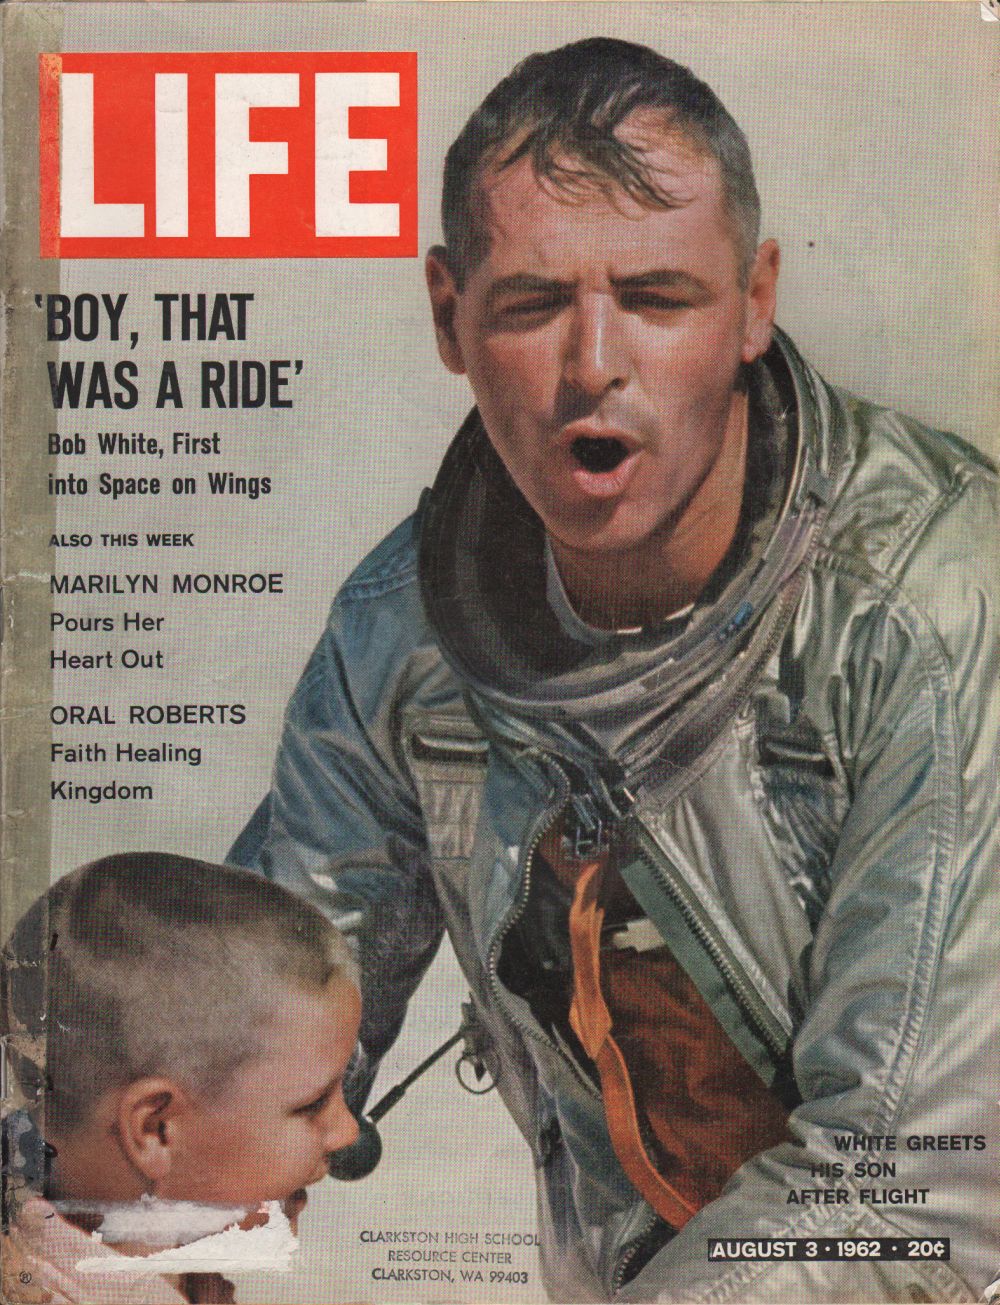 Life Magazine Cover, August 3, 1962